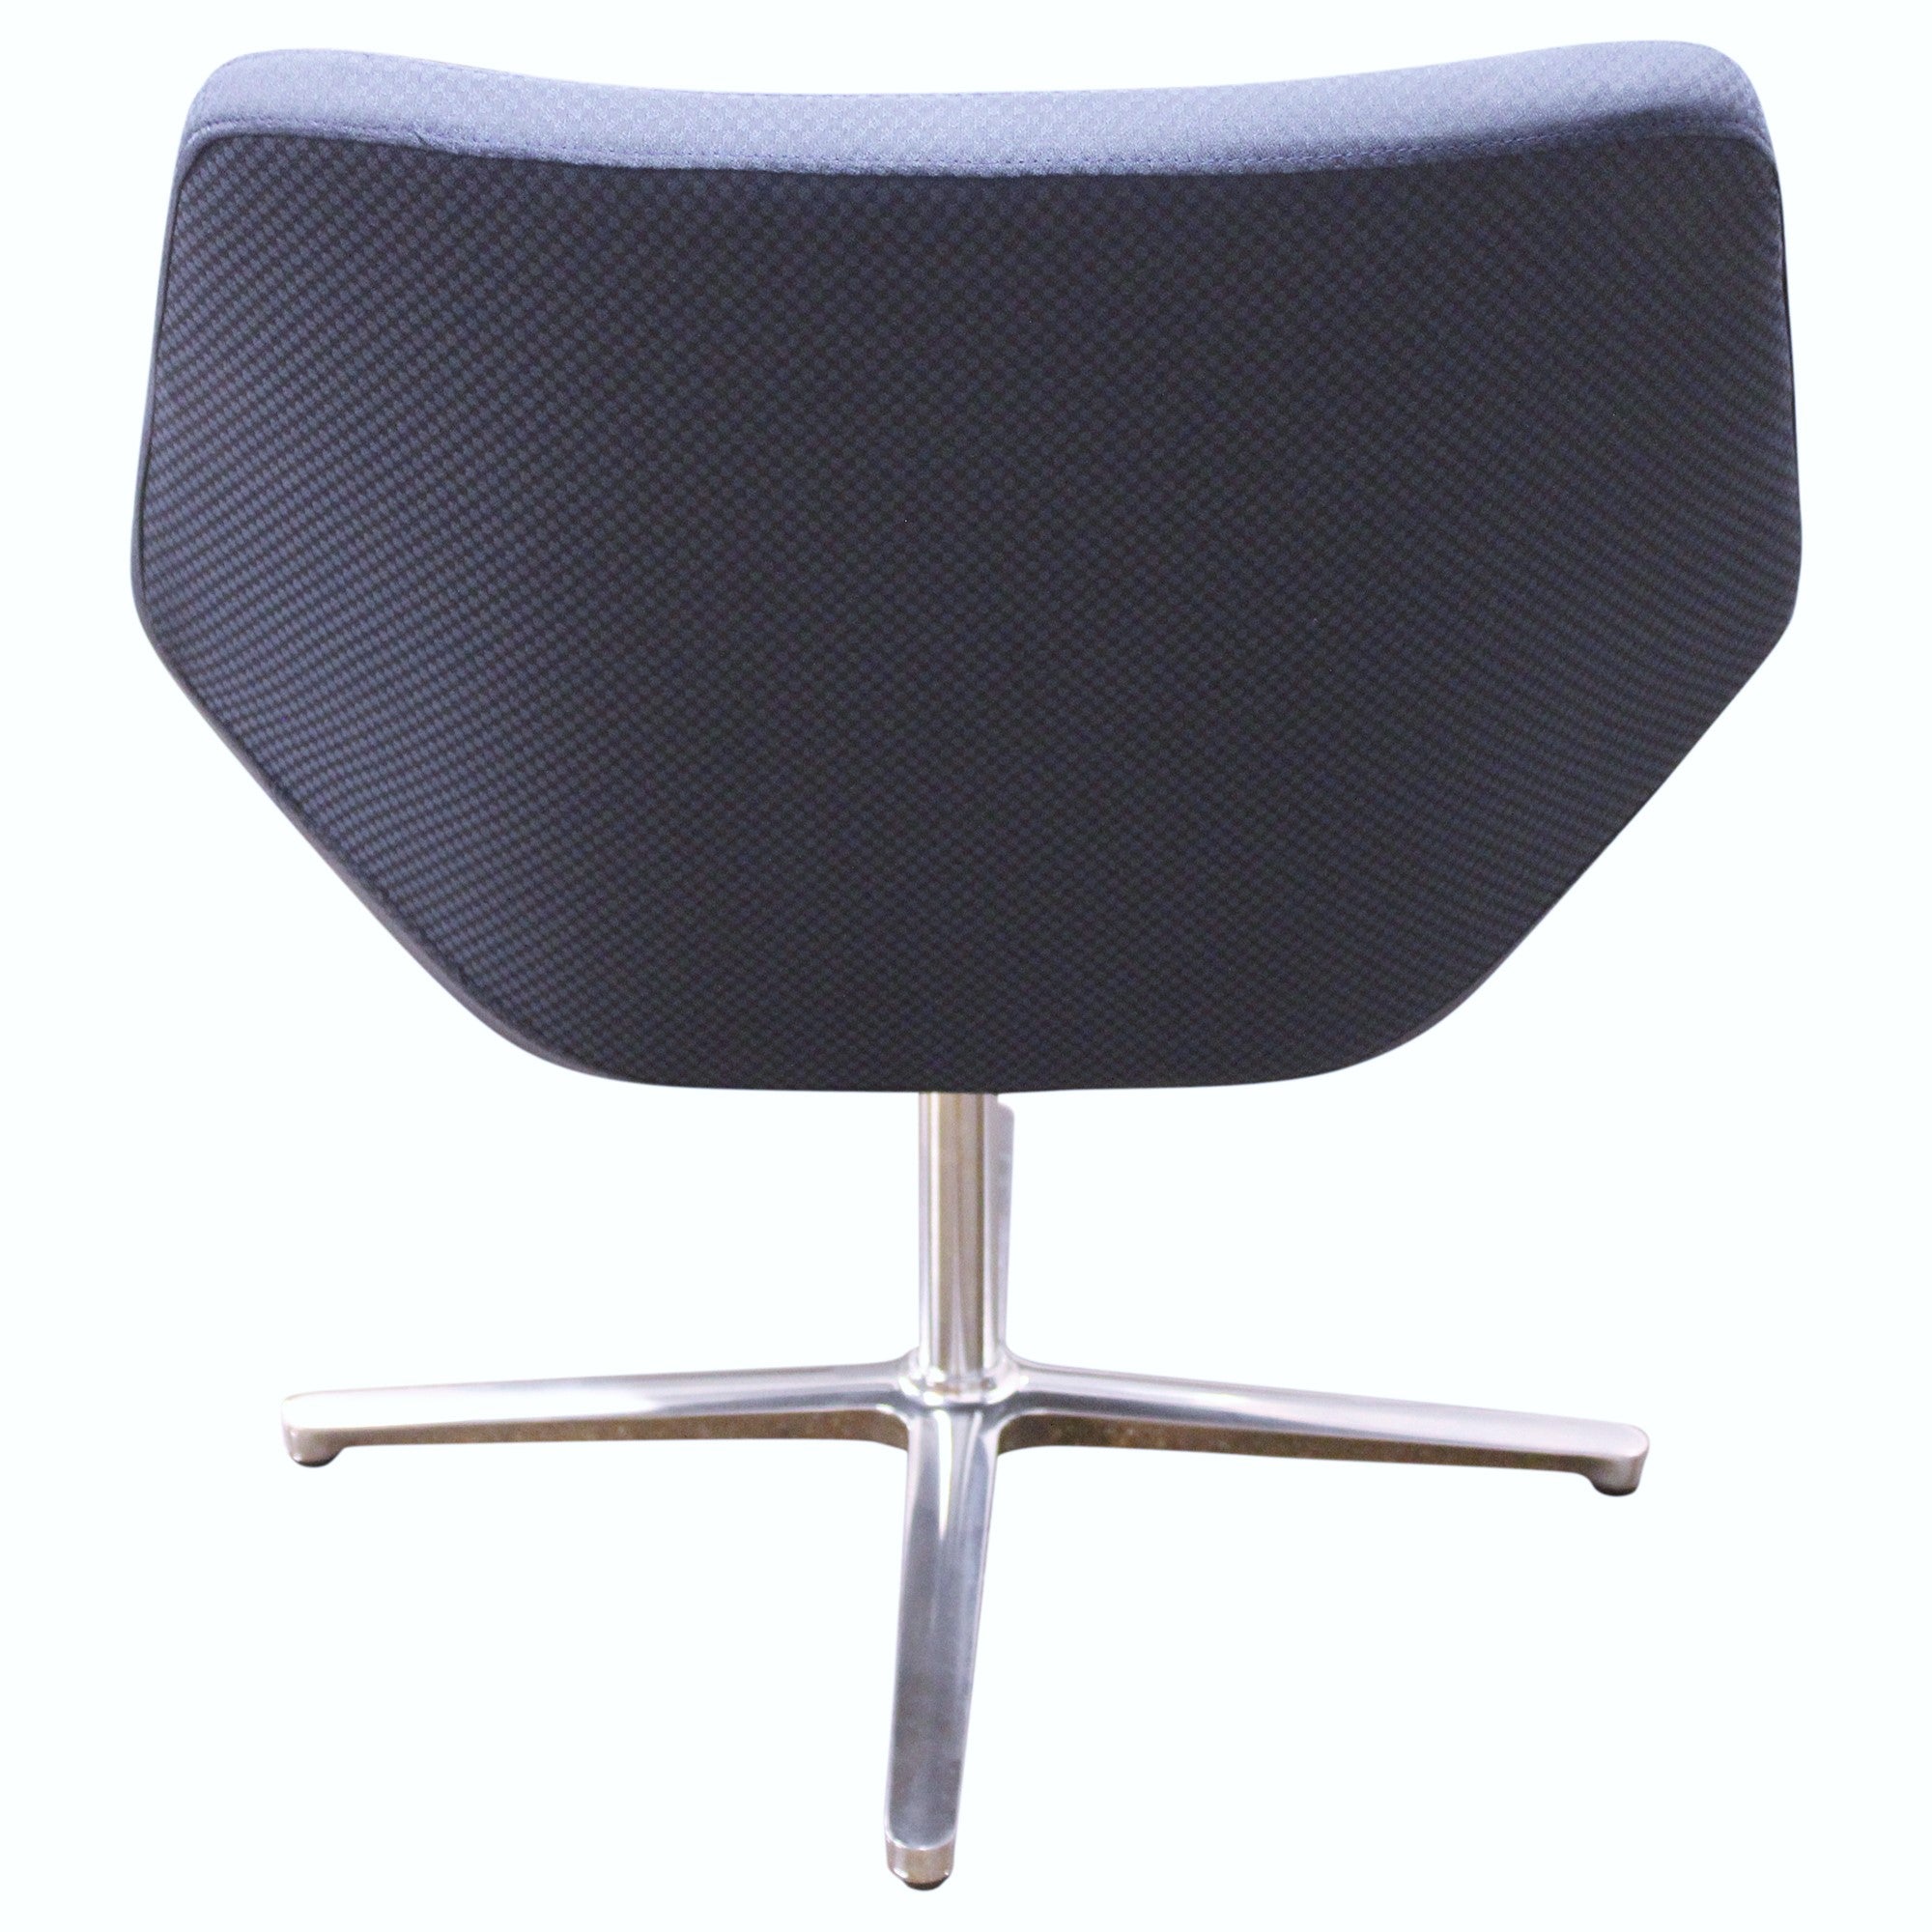 Keilhauer Cahoots Swivel Base Lounge Chair, Navy Blue - Preowned